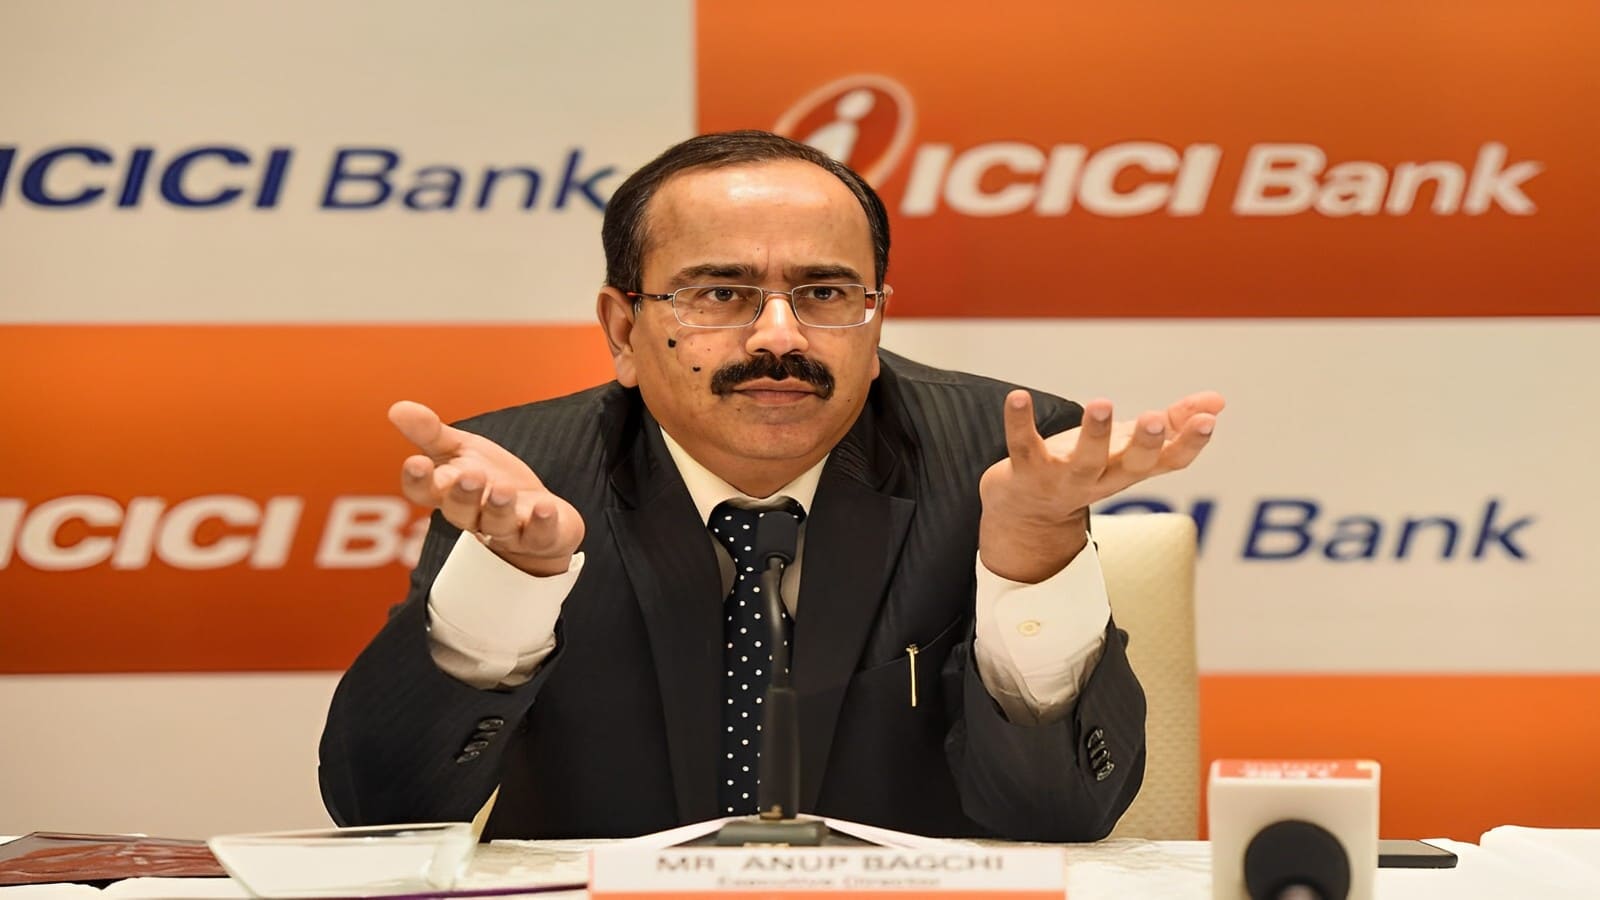 Anup Bagchi Takes Over as ICICI Prudential CEO from NS Kannan